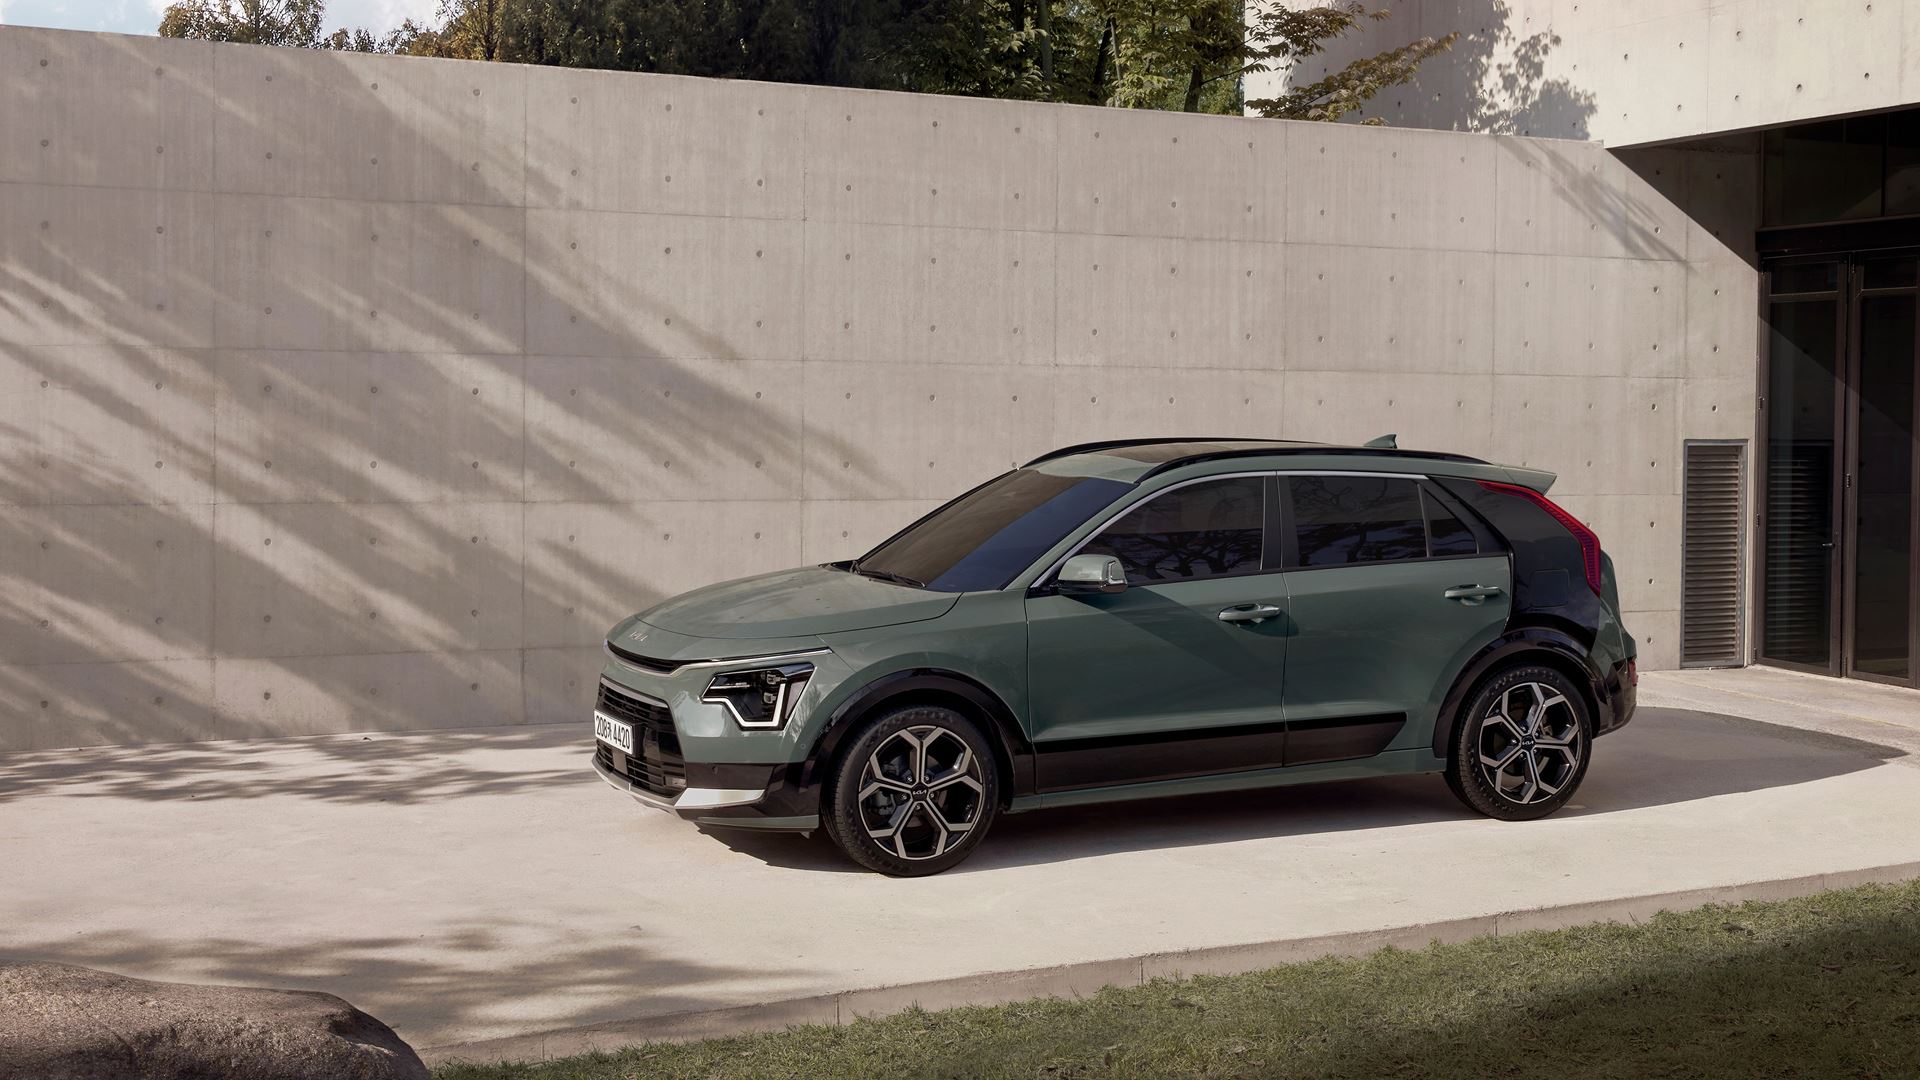 The all−new Niro embodies Kia's commitment to a sustainable future